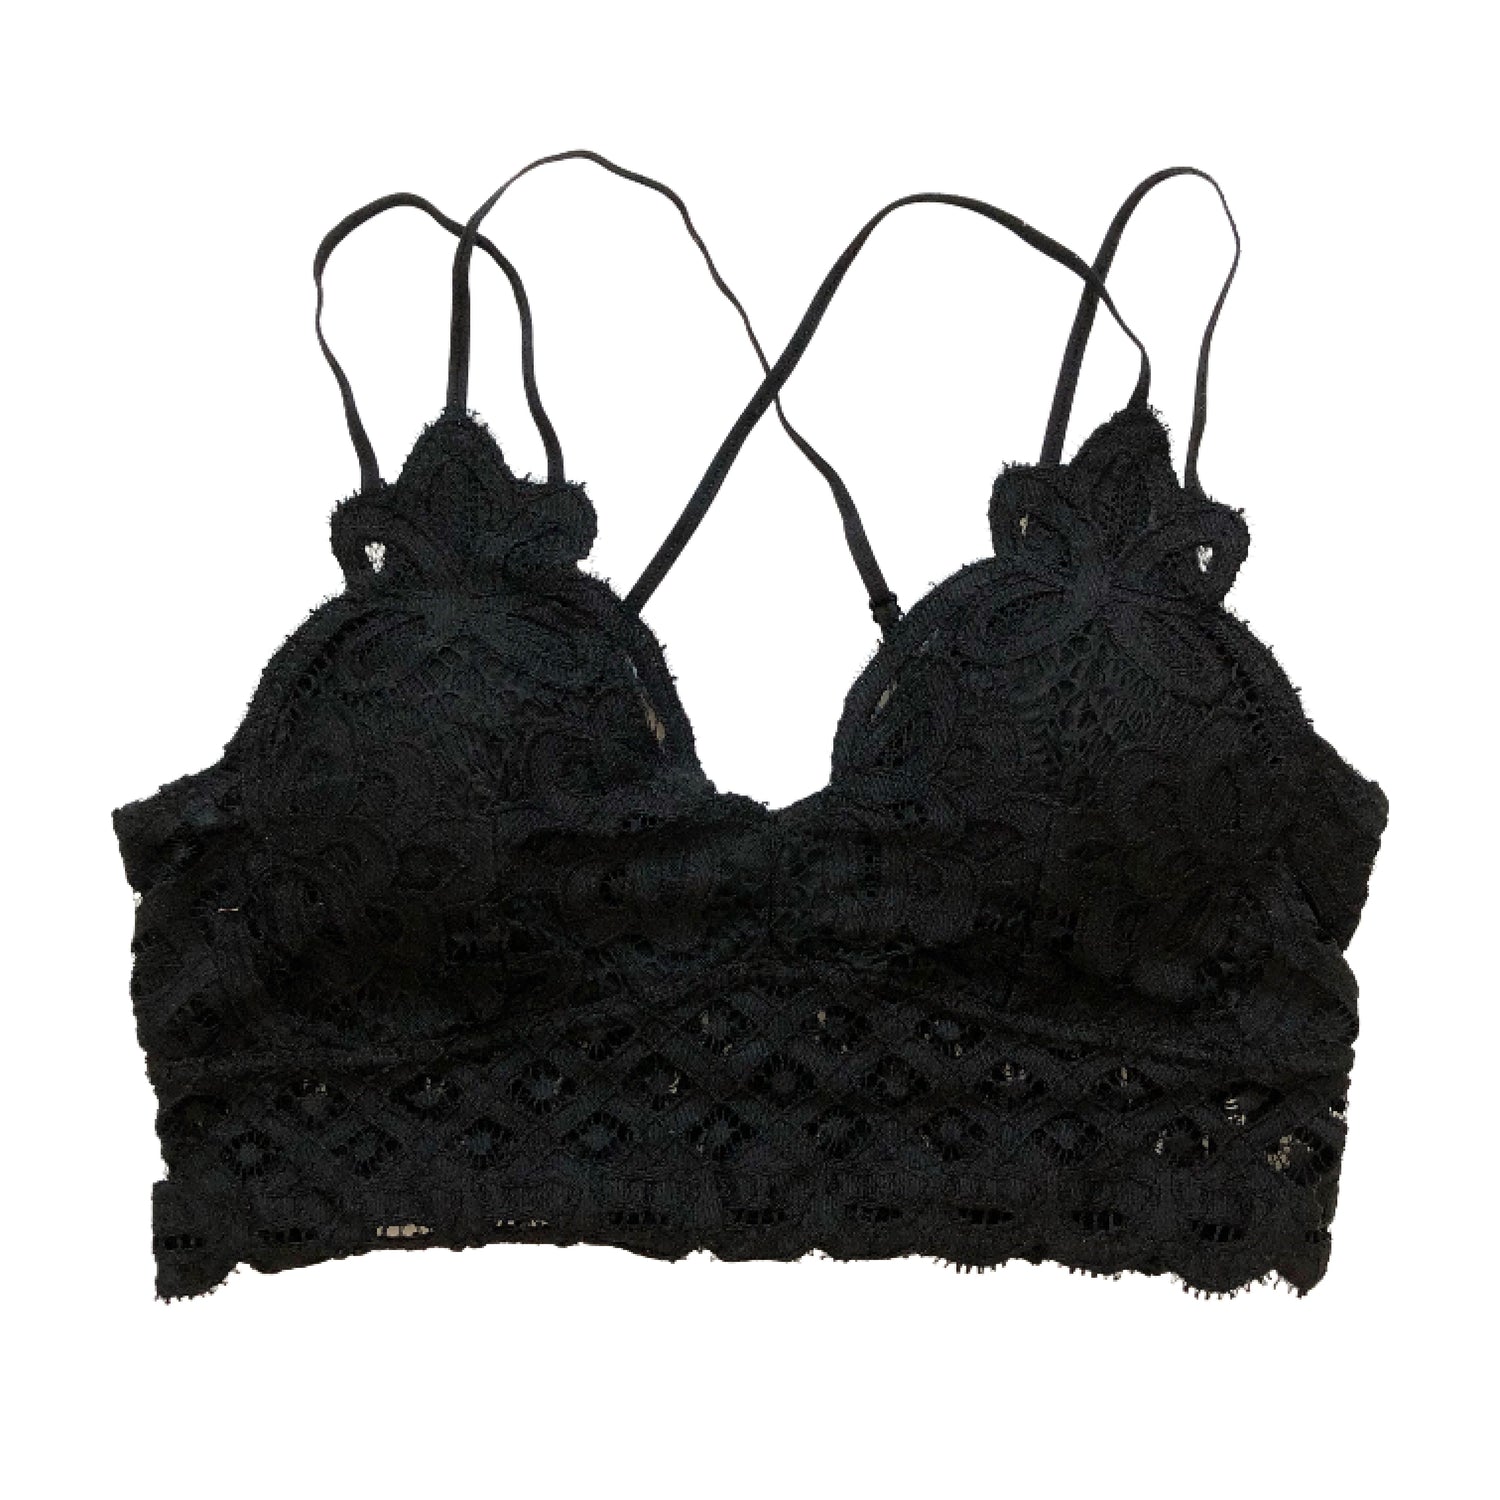 Stunning Black Lace Bralette with Spaghetti Straps